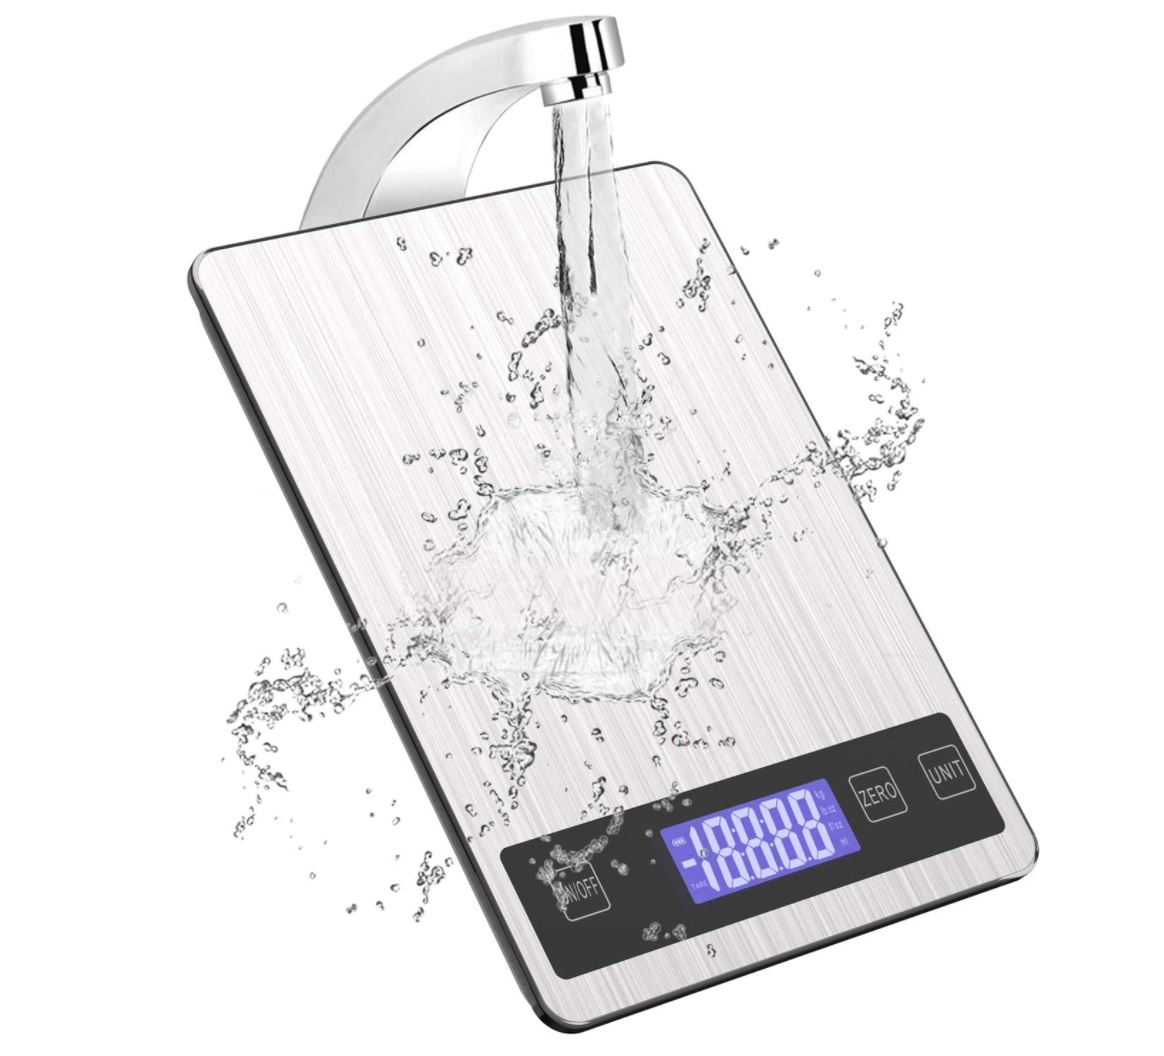 FATE TO FATE Digital Kitchen Food Scales